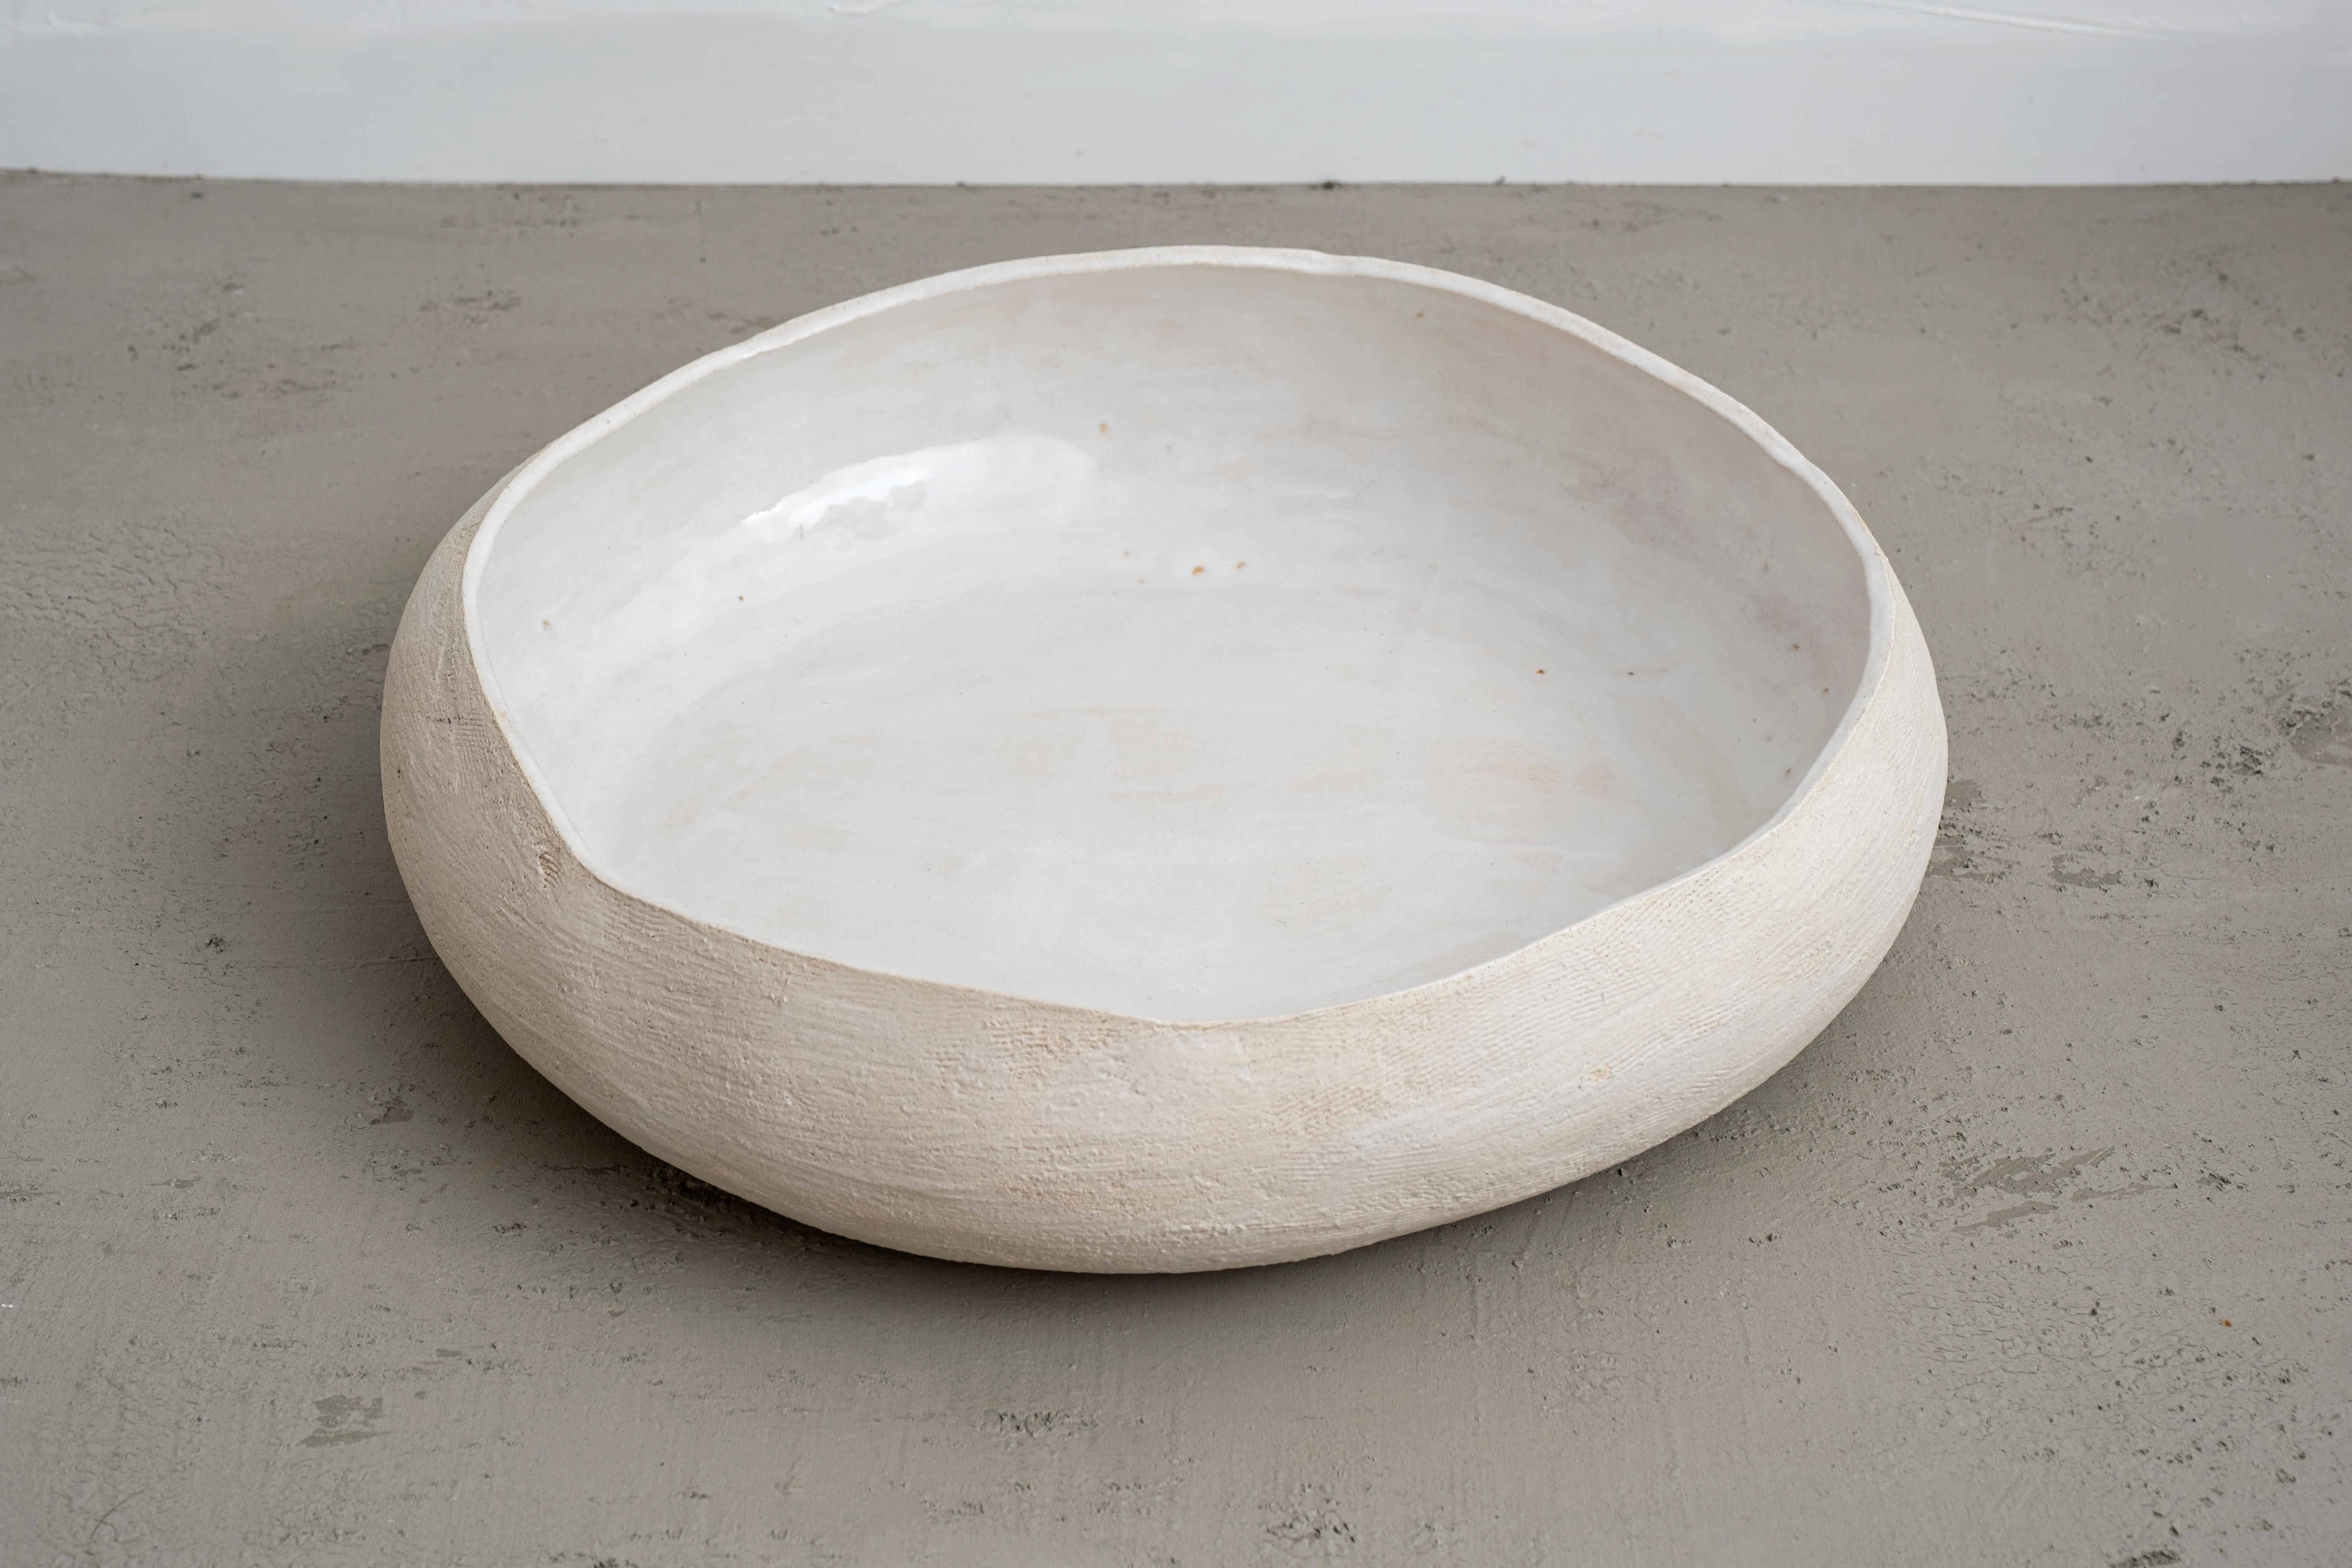 Alcove #9 sculpture by Margaux Leycuras
One of a Kind, Signed and numbered
Dimensions: D 53 x H 51 cm.
Material: Sandy stoneware with a porcelain slip finish and white glaze inside.

The piece is signed, numbered and delivered with a